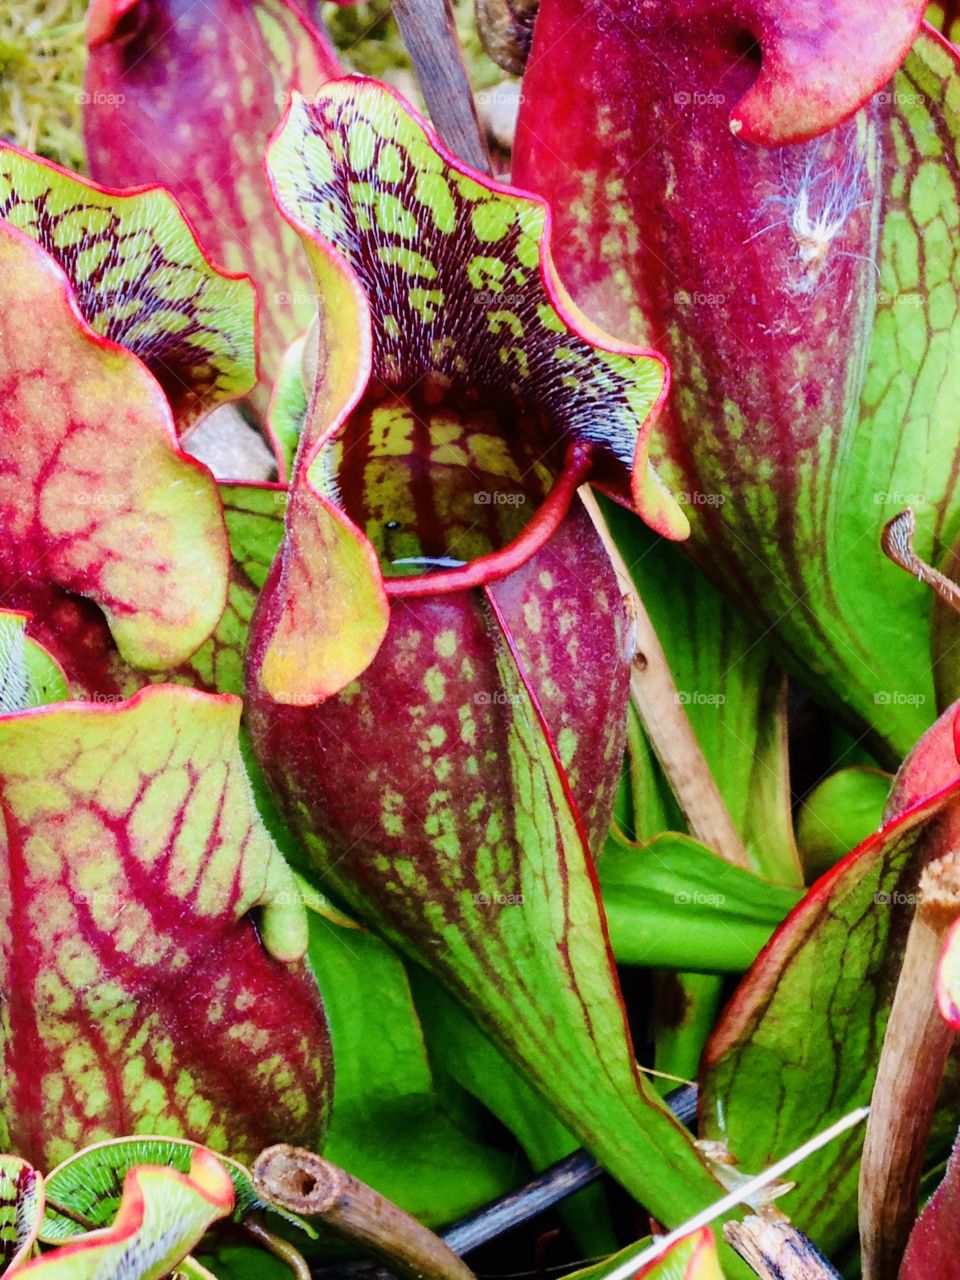 Purple pitcher plants at Spruce Flats Bog in PA